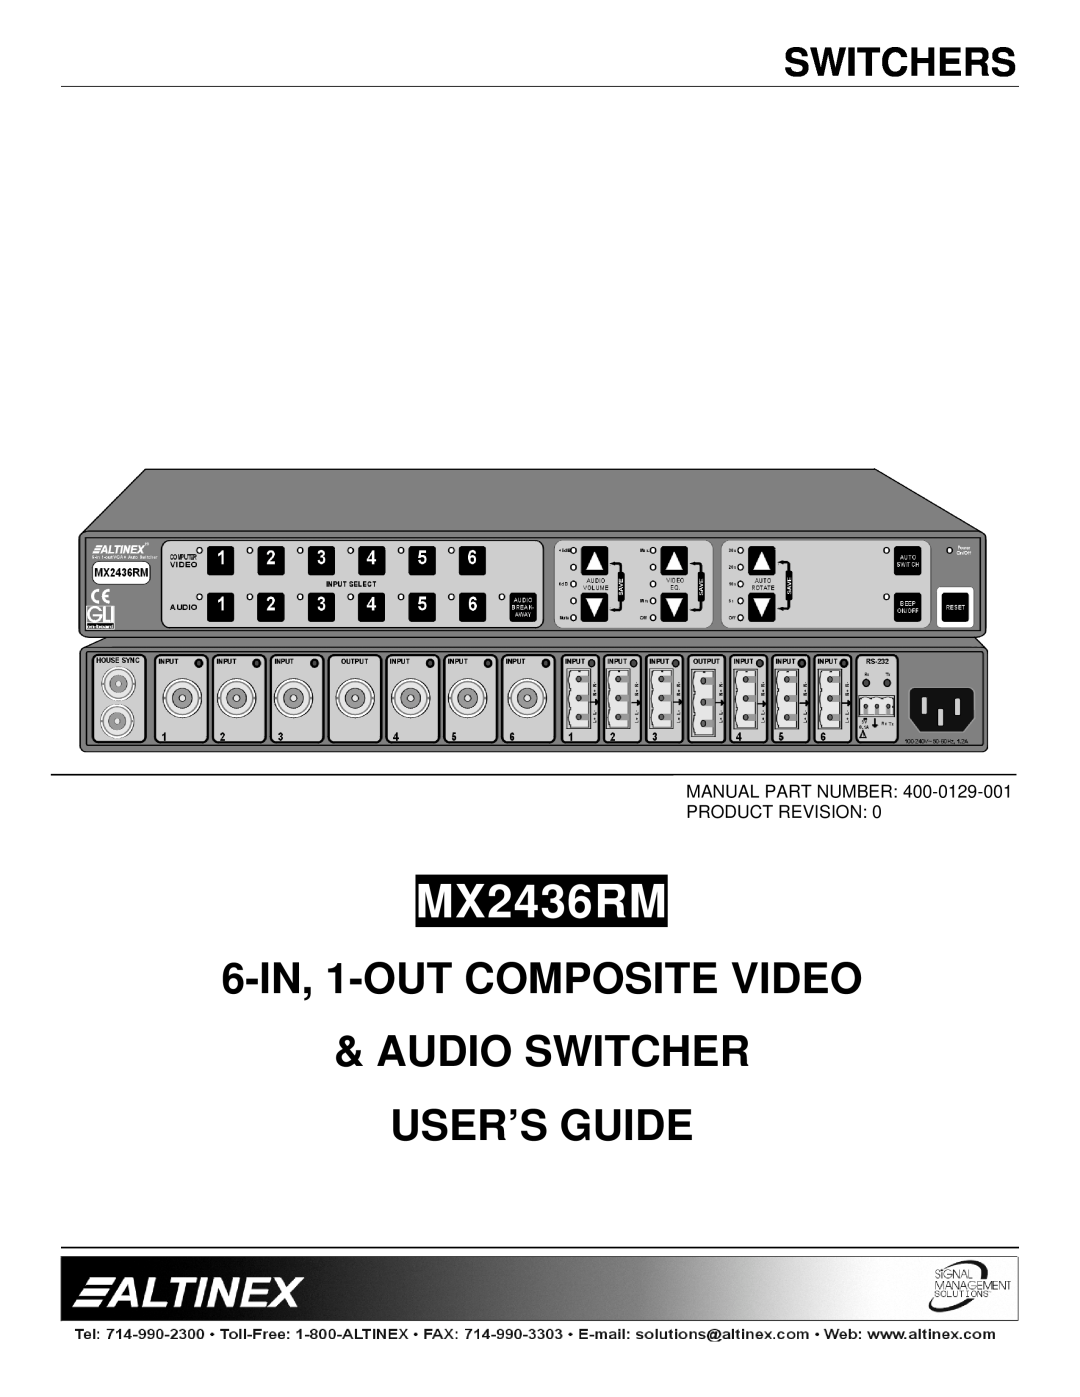 Altinex MX2436RM manual Switchers, 6-IN, 1-OUT COMPOSITE VIDEO AUDIO SWITCHER USER’S GUIDE 